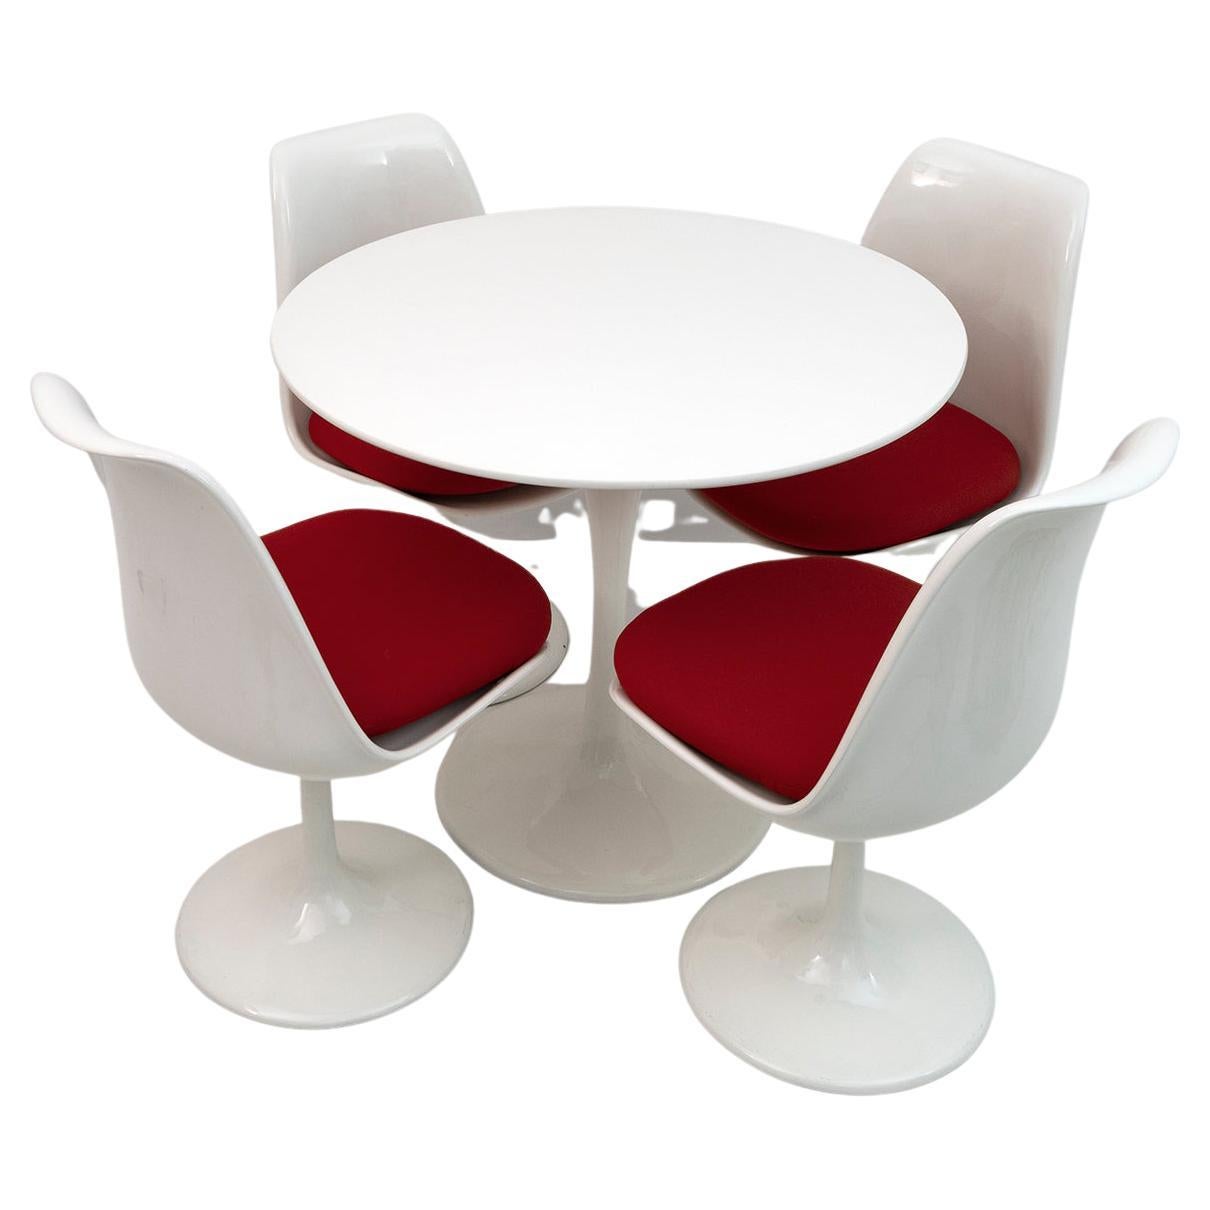 Set of table and four chairs by Eero Saarinen model Tulip from the late 1950s. The set is in excellent condition and the fabric is original.
The table measures 90 cm in diameter x H 79.